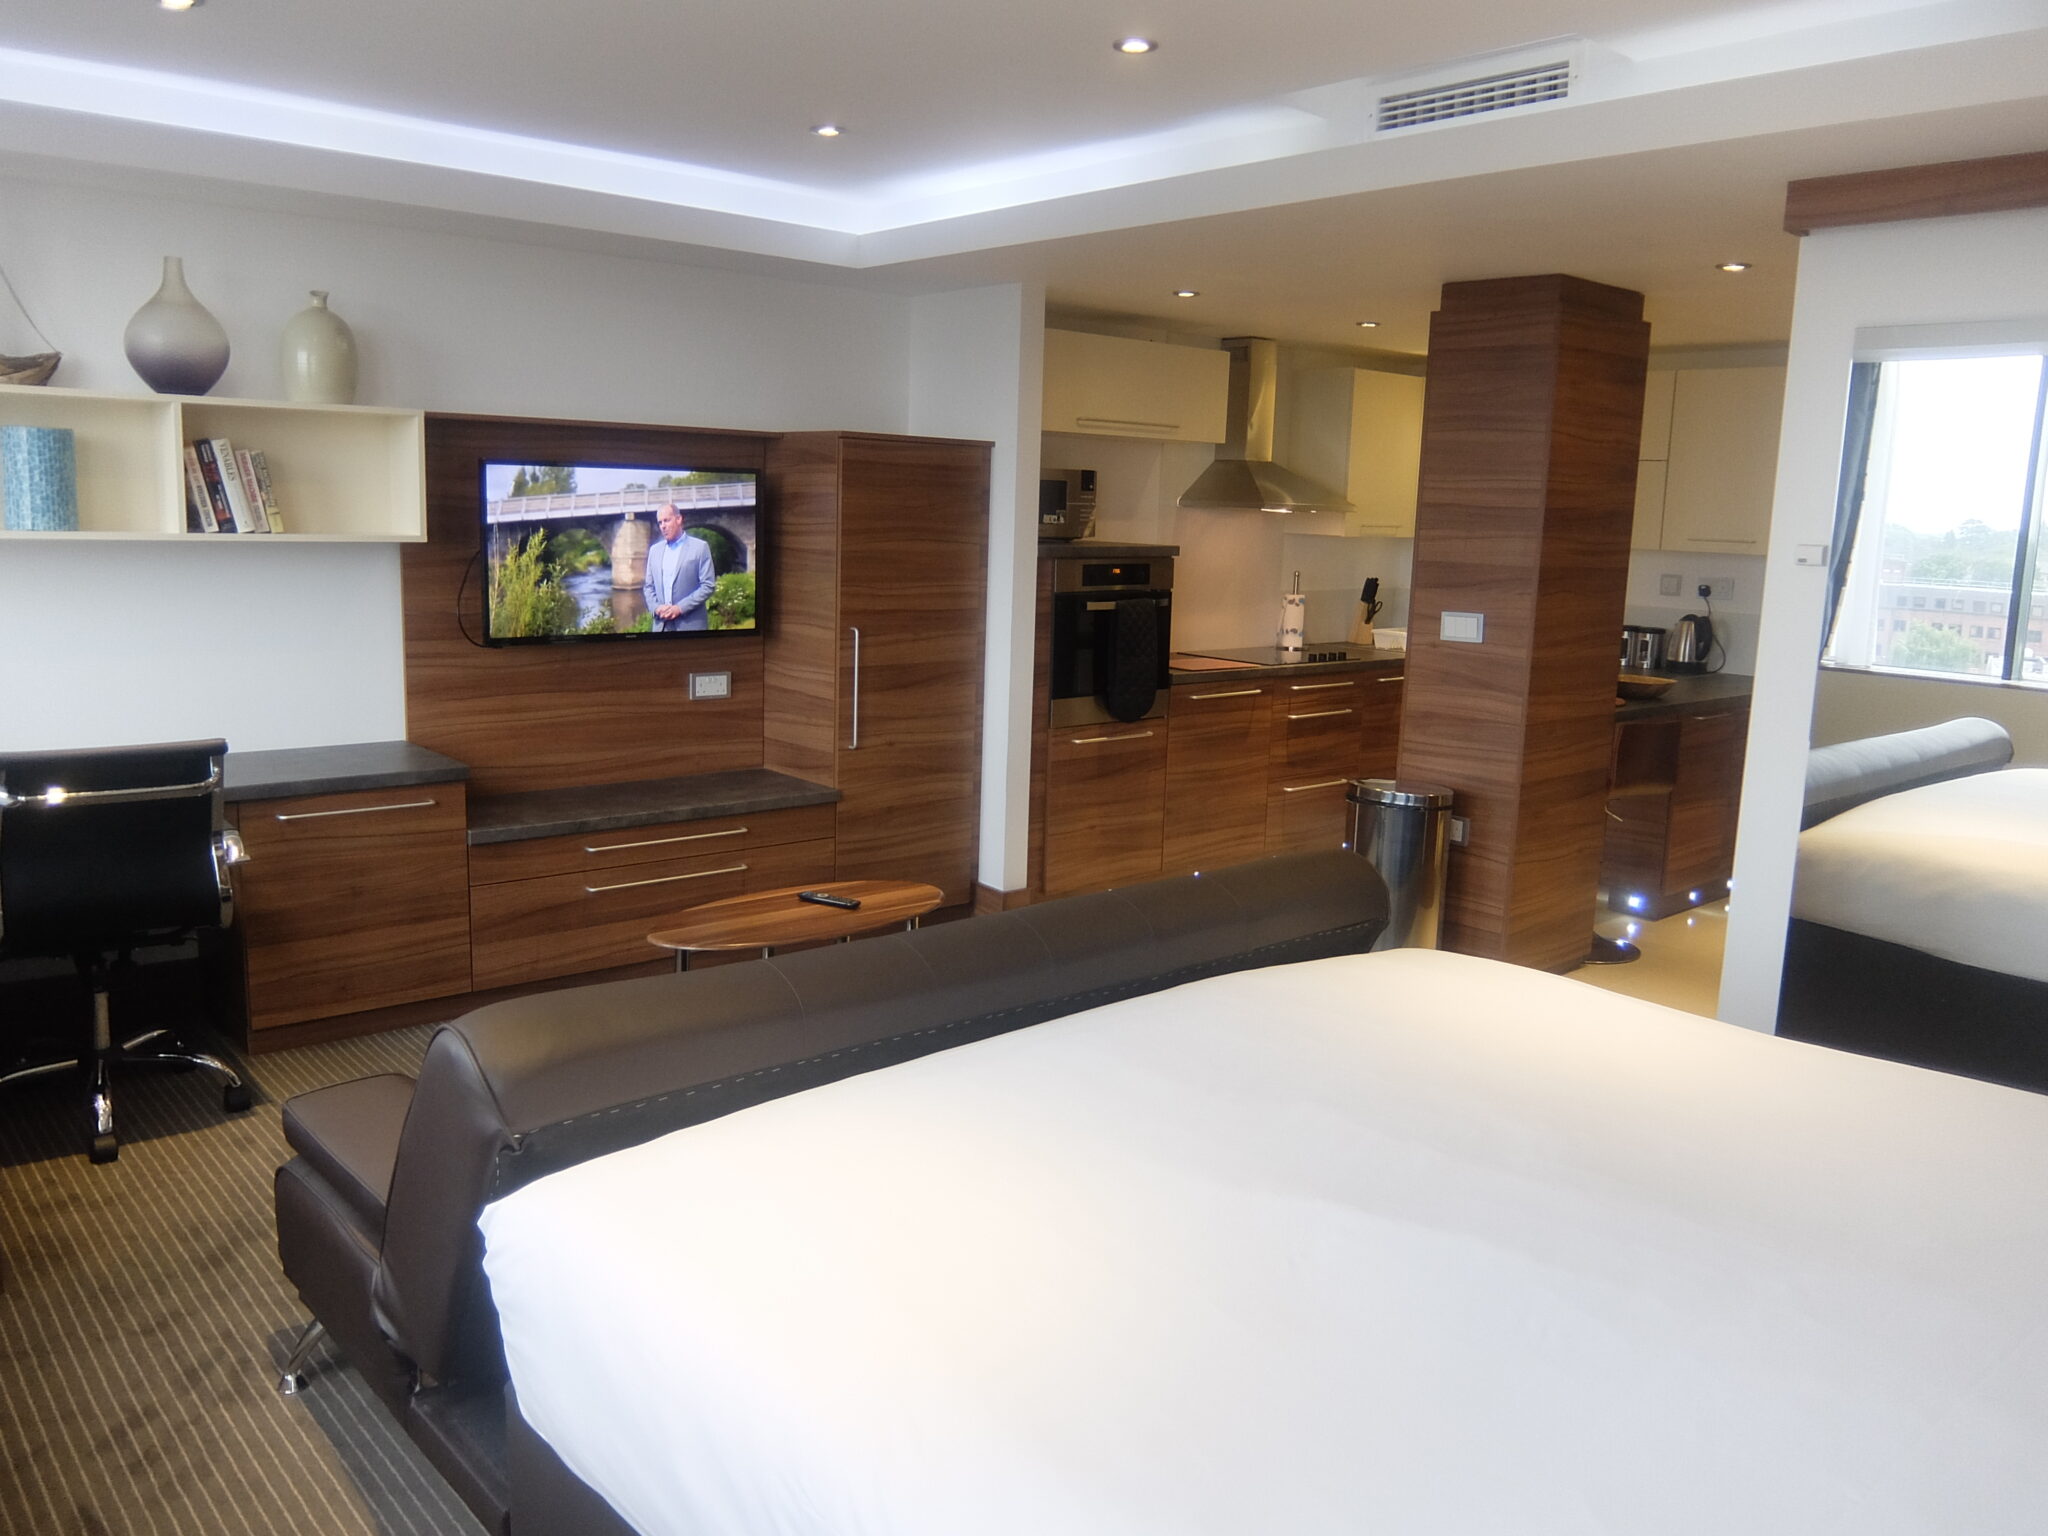 Flanders Court Apartments - West London Serviced Apartments - Watford | Urban Stay